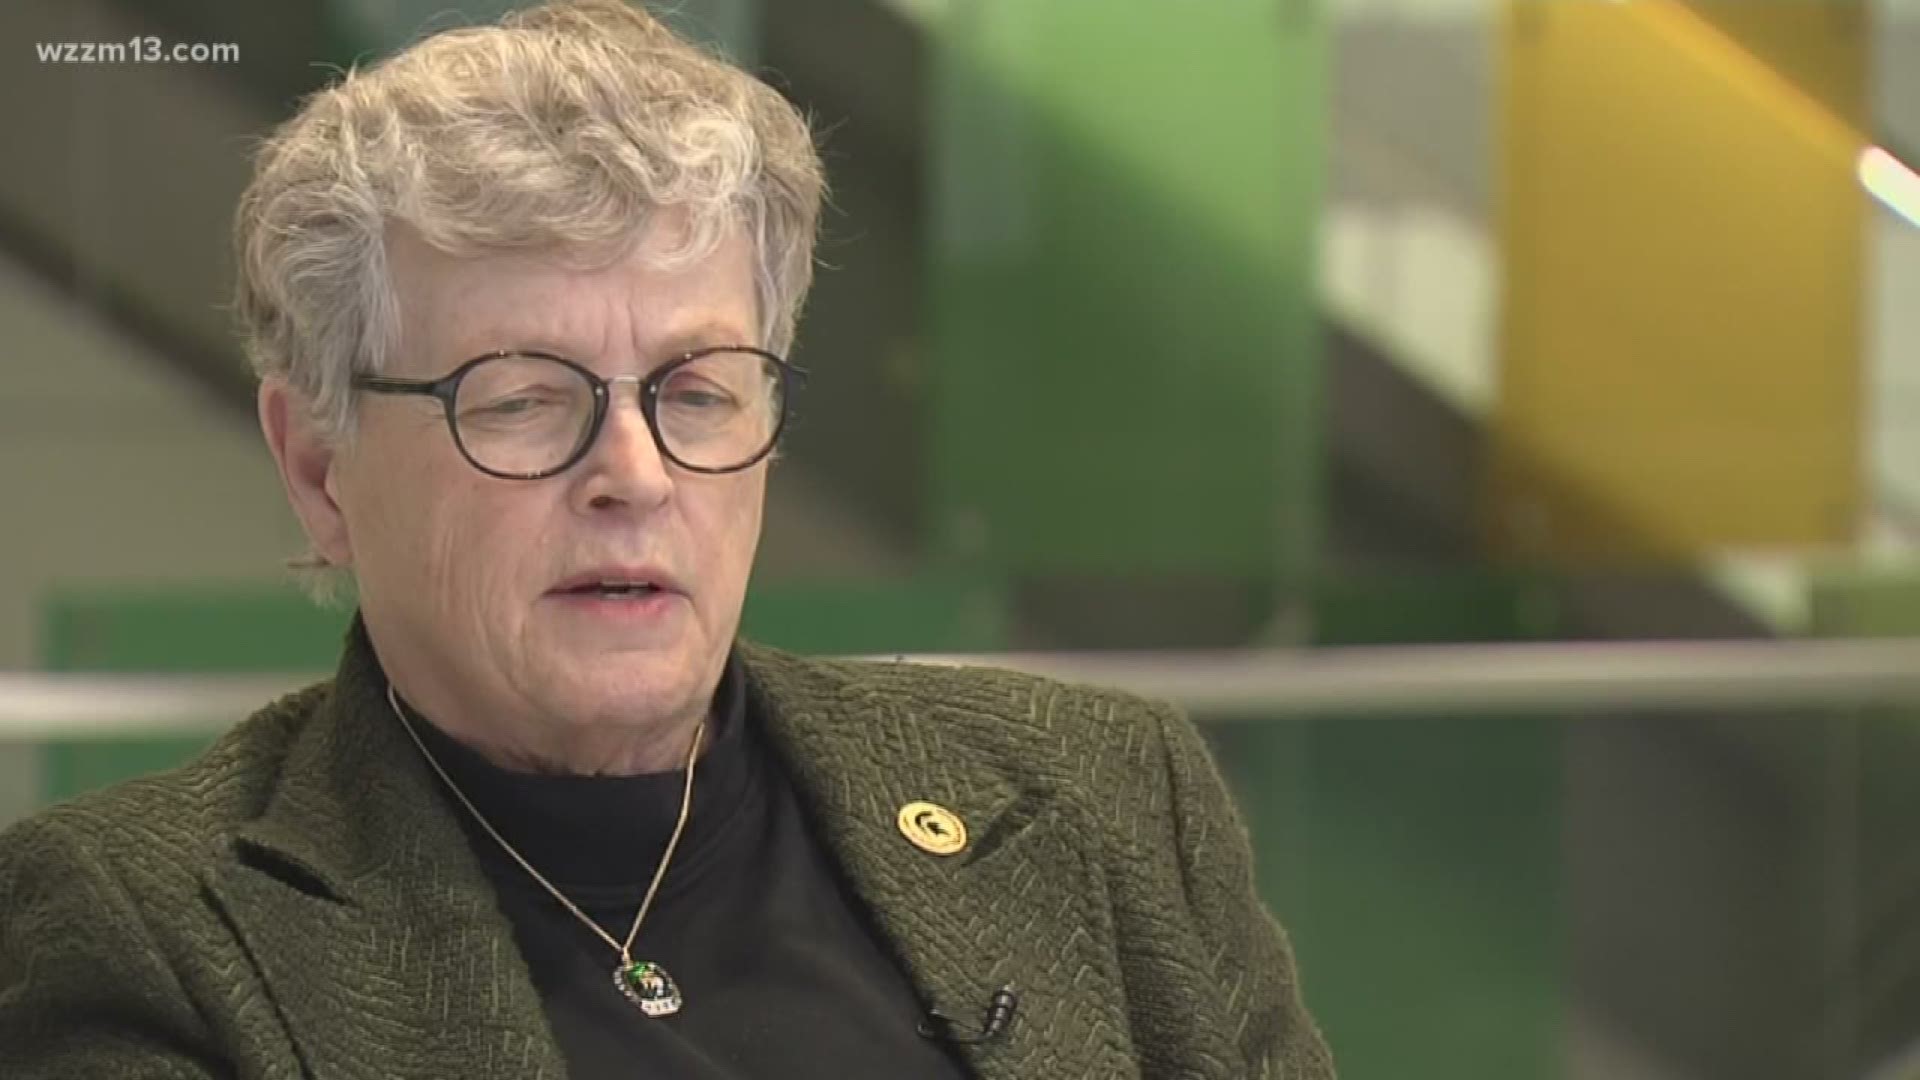 West Michigan State Senator Schuitmaker has her thoughts on the MSU president.